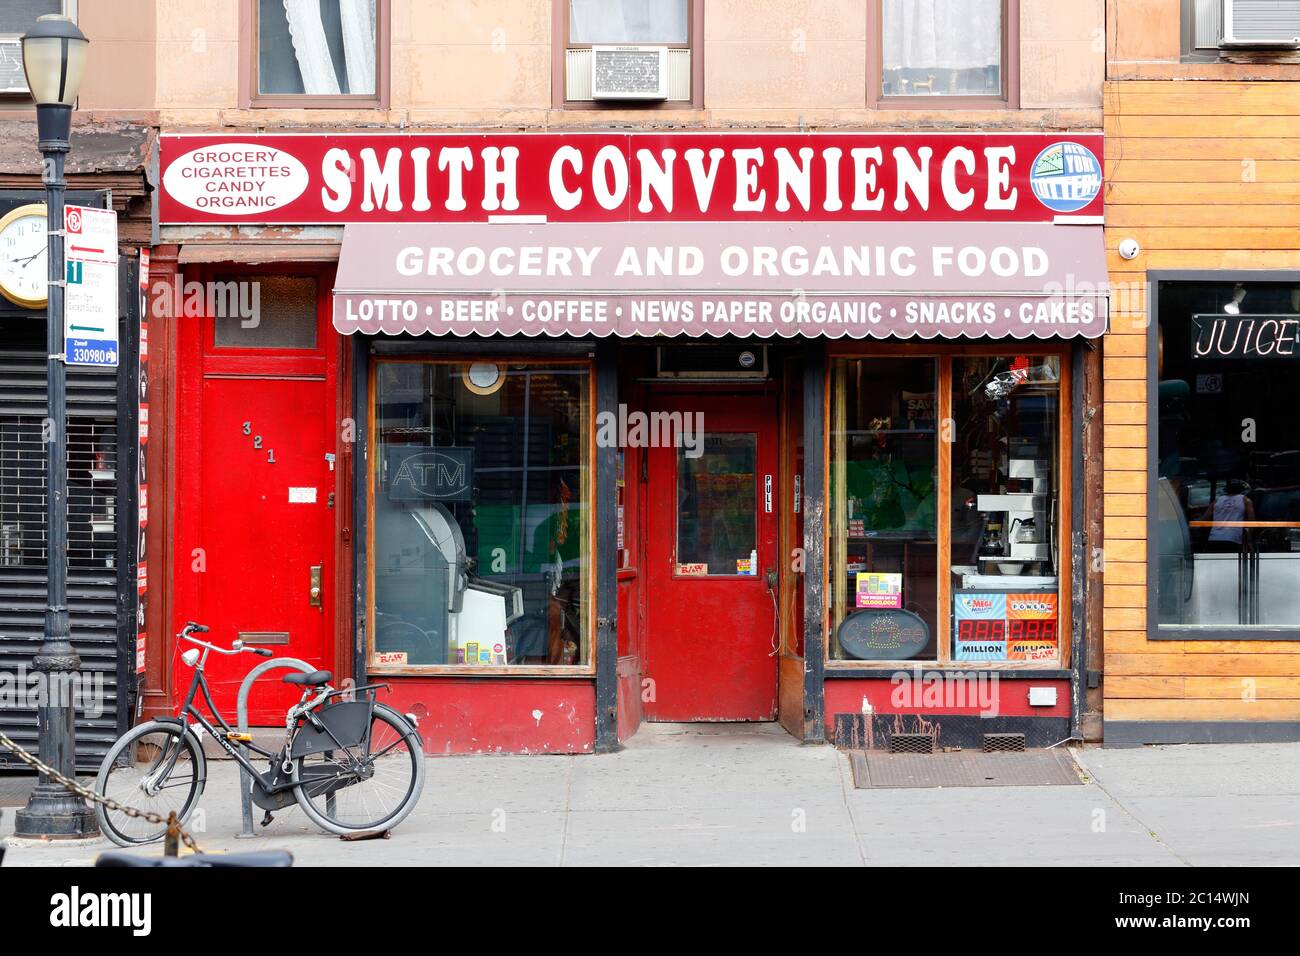 Smith Convenience, 321 Smith Street, Brooklyn, New York. NYC storefront photo of a convenience store in the Carroll Gardens neighborhood. Stock Photo